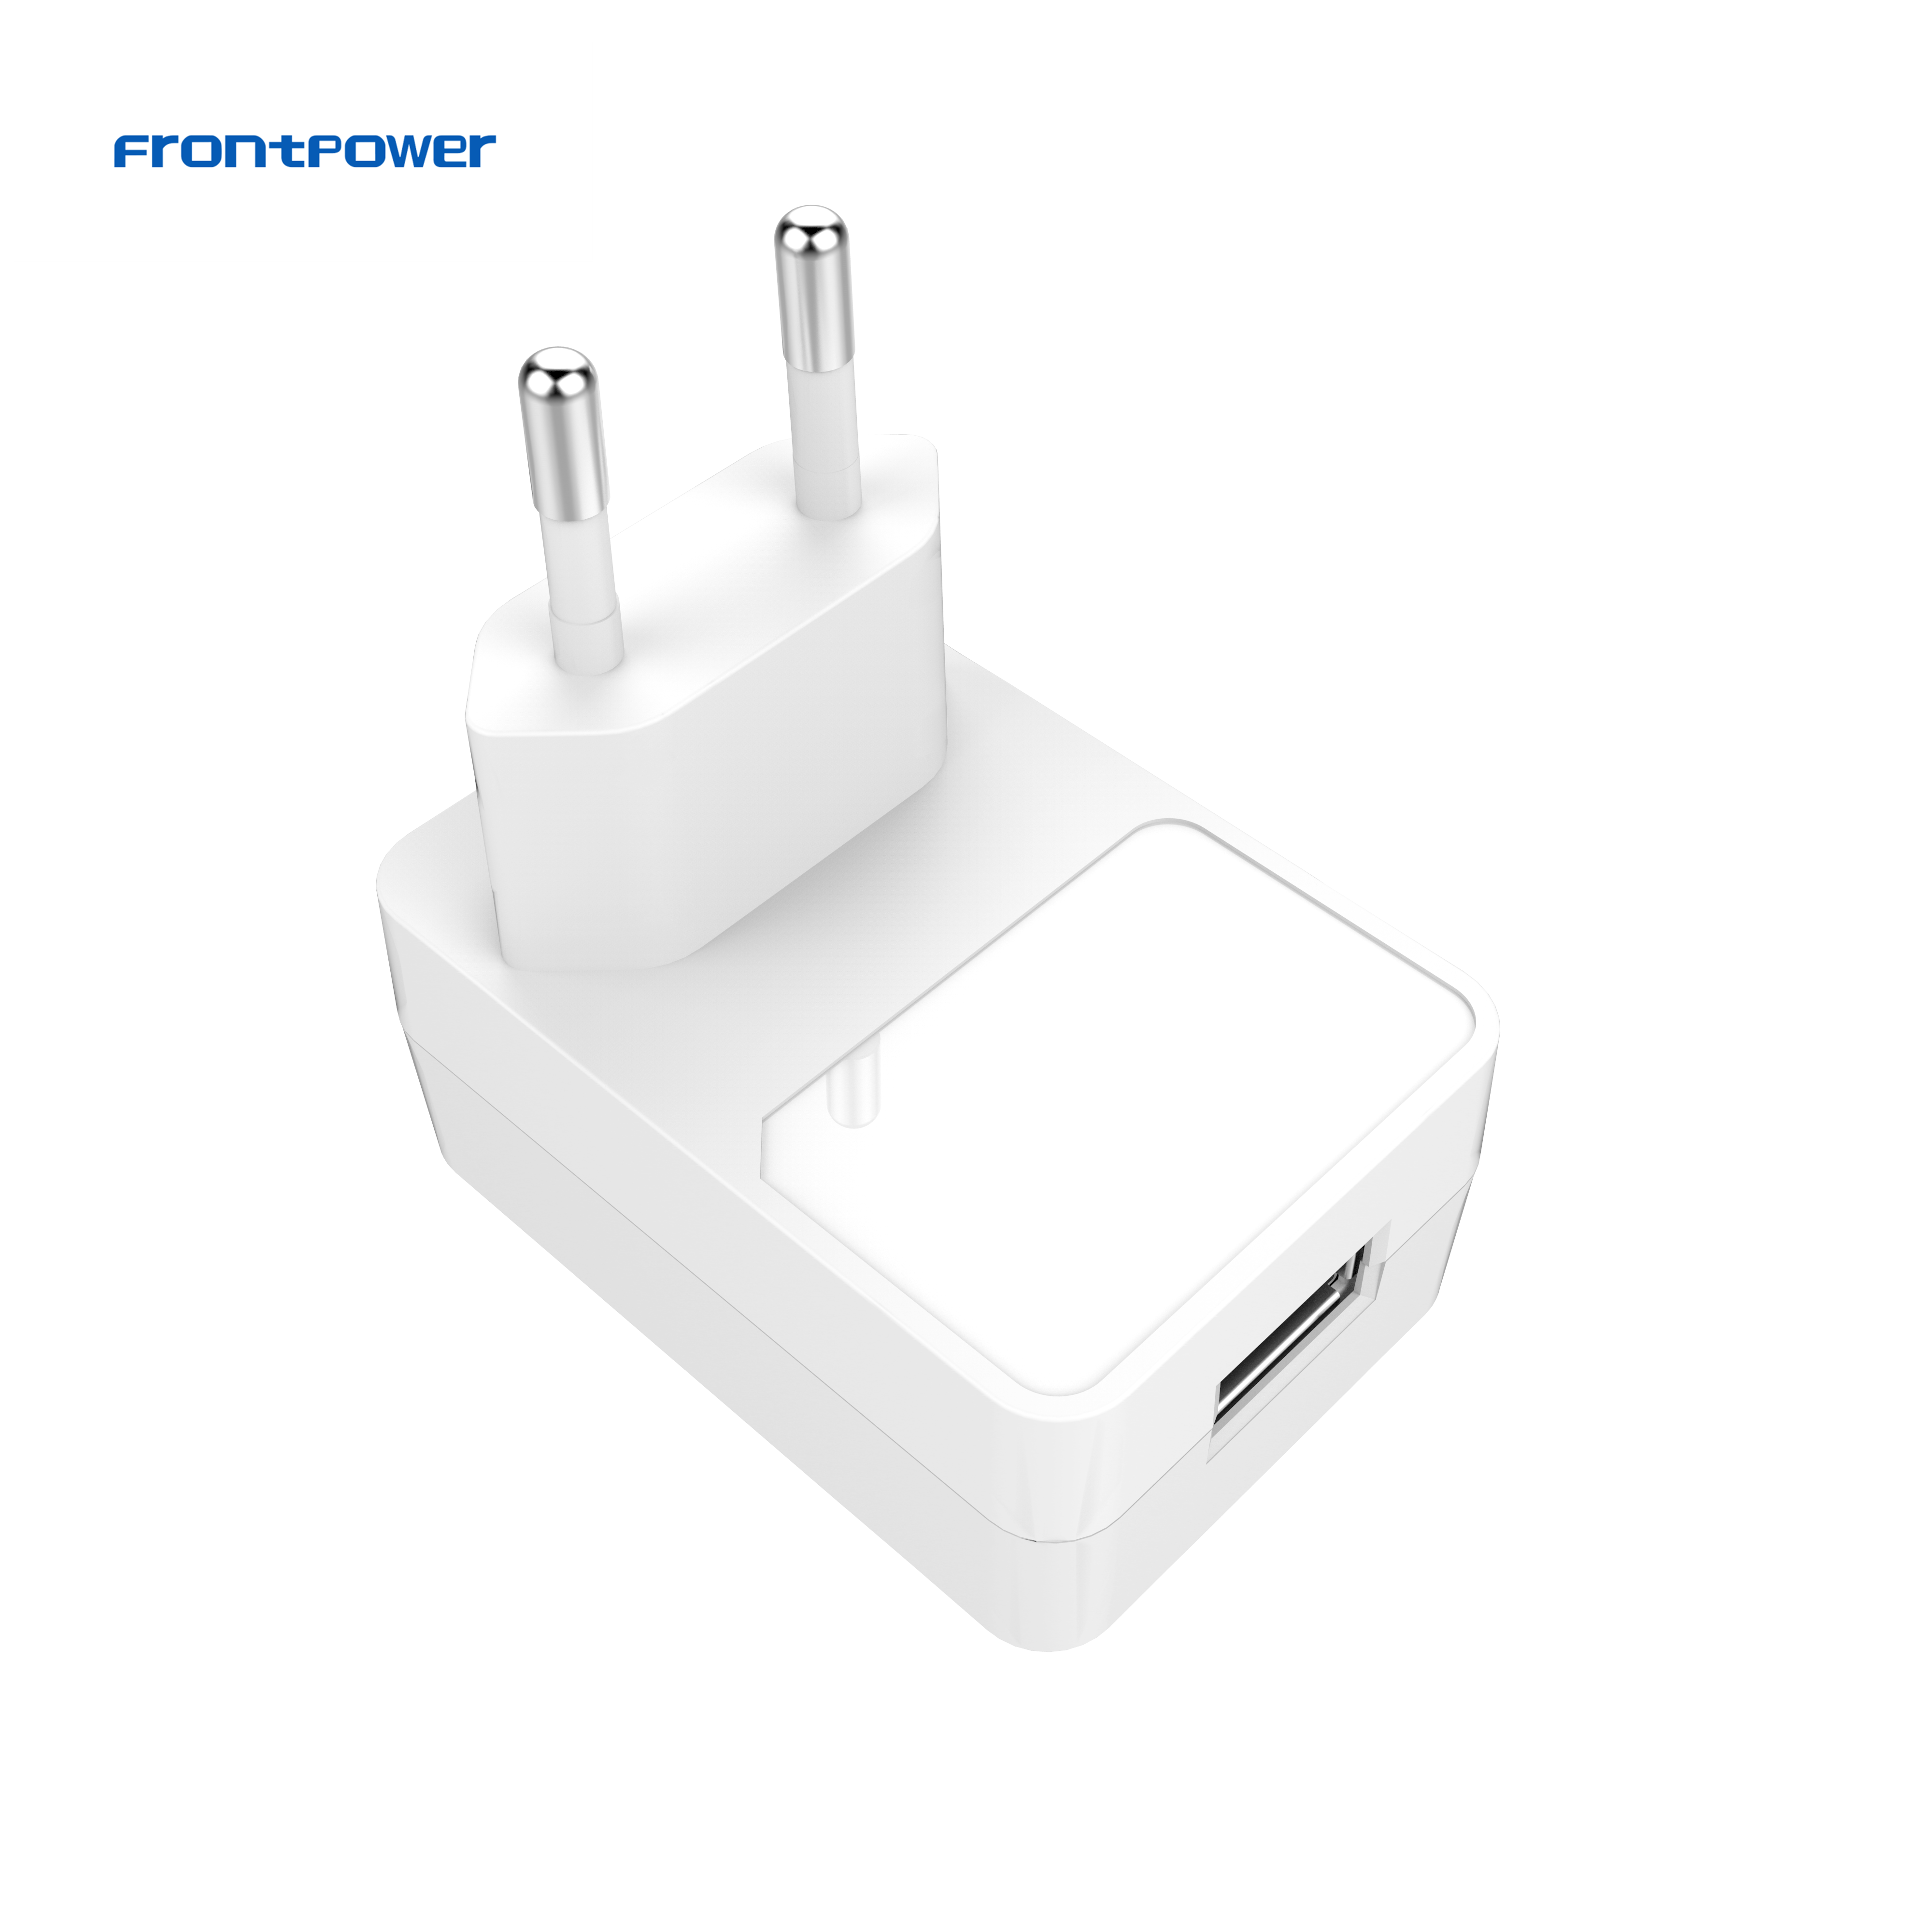 Frontpower kc power adaptor 5V 2A KR plug power supply USB adapter for LED device